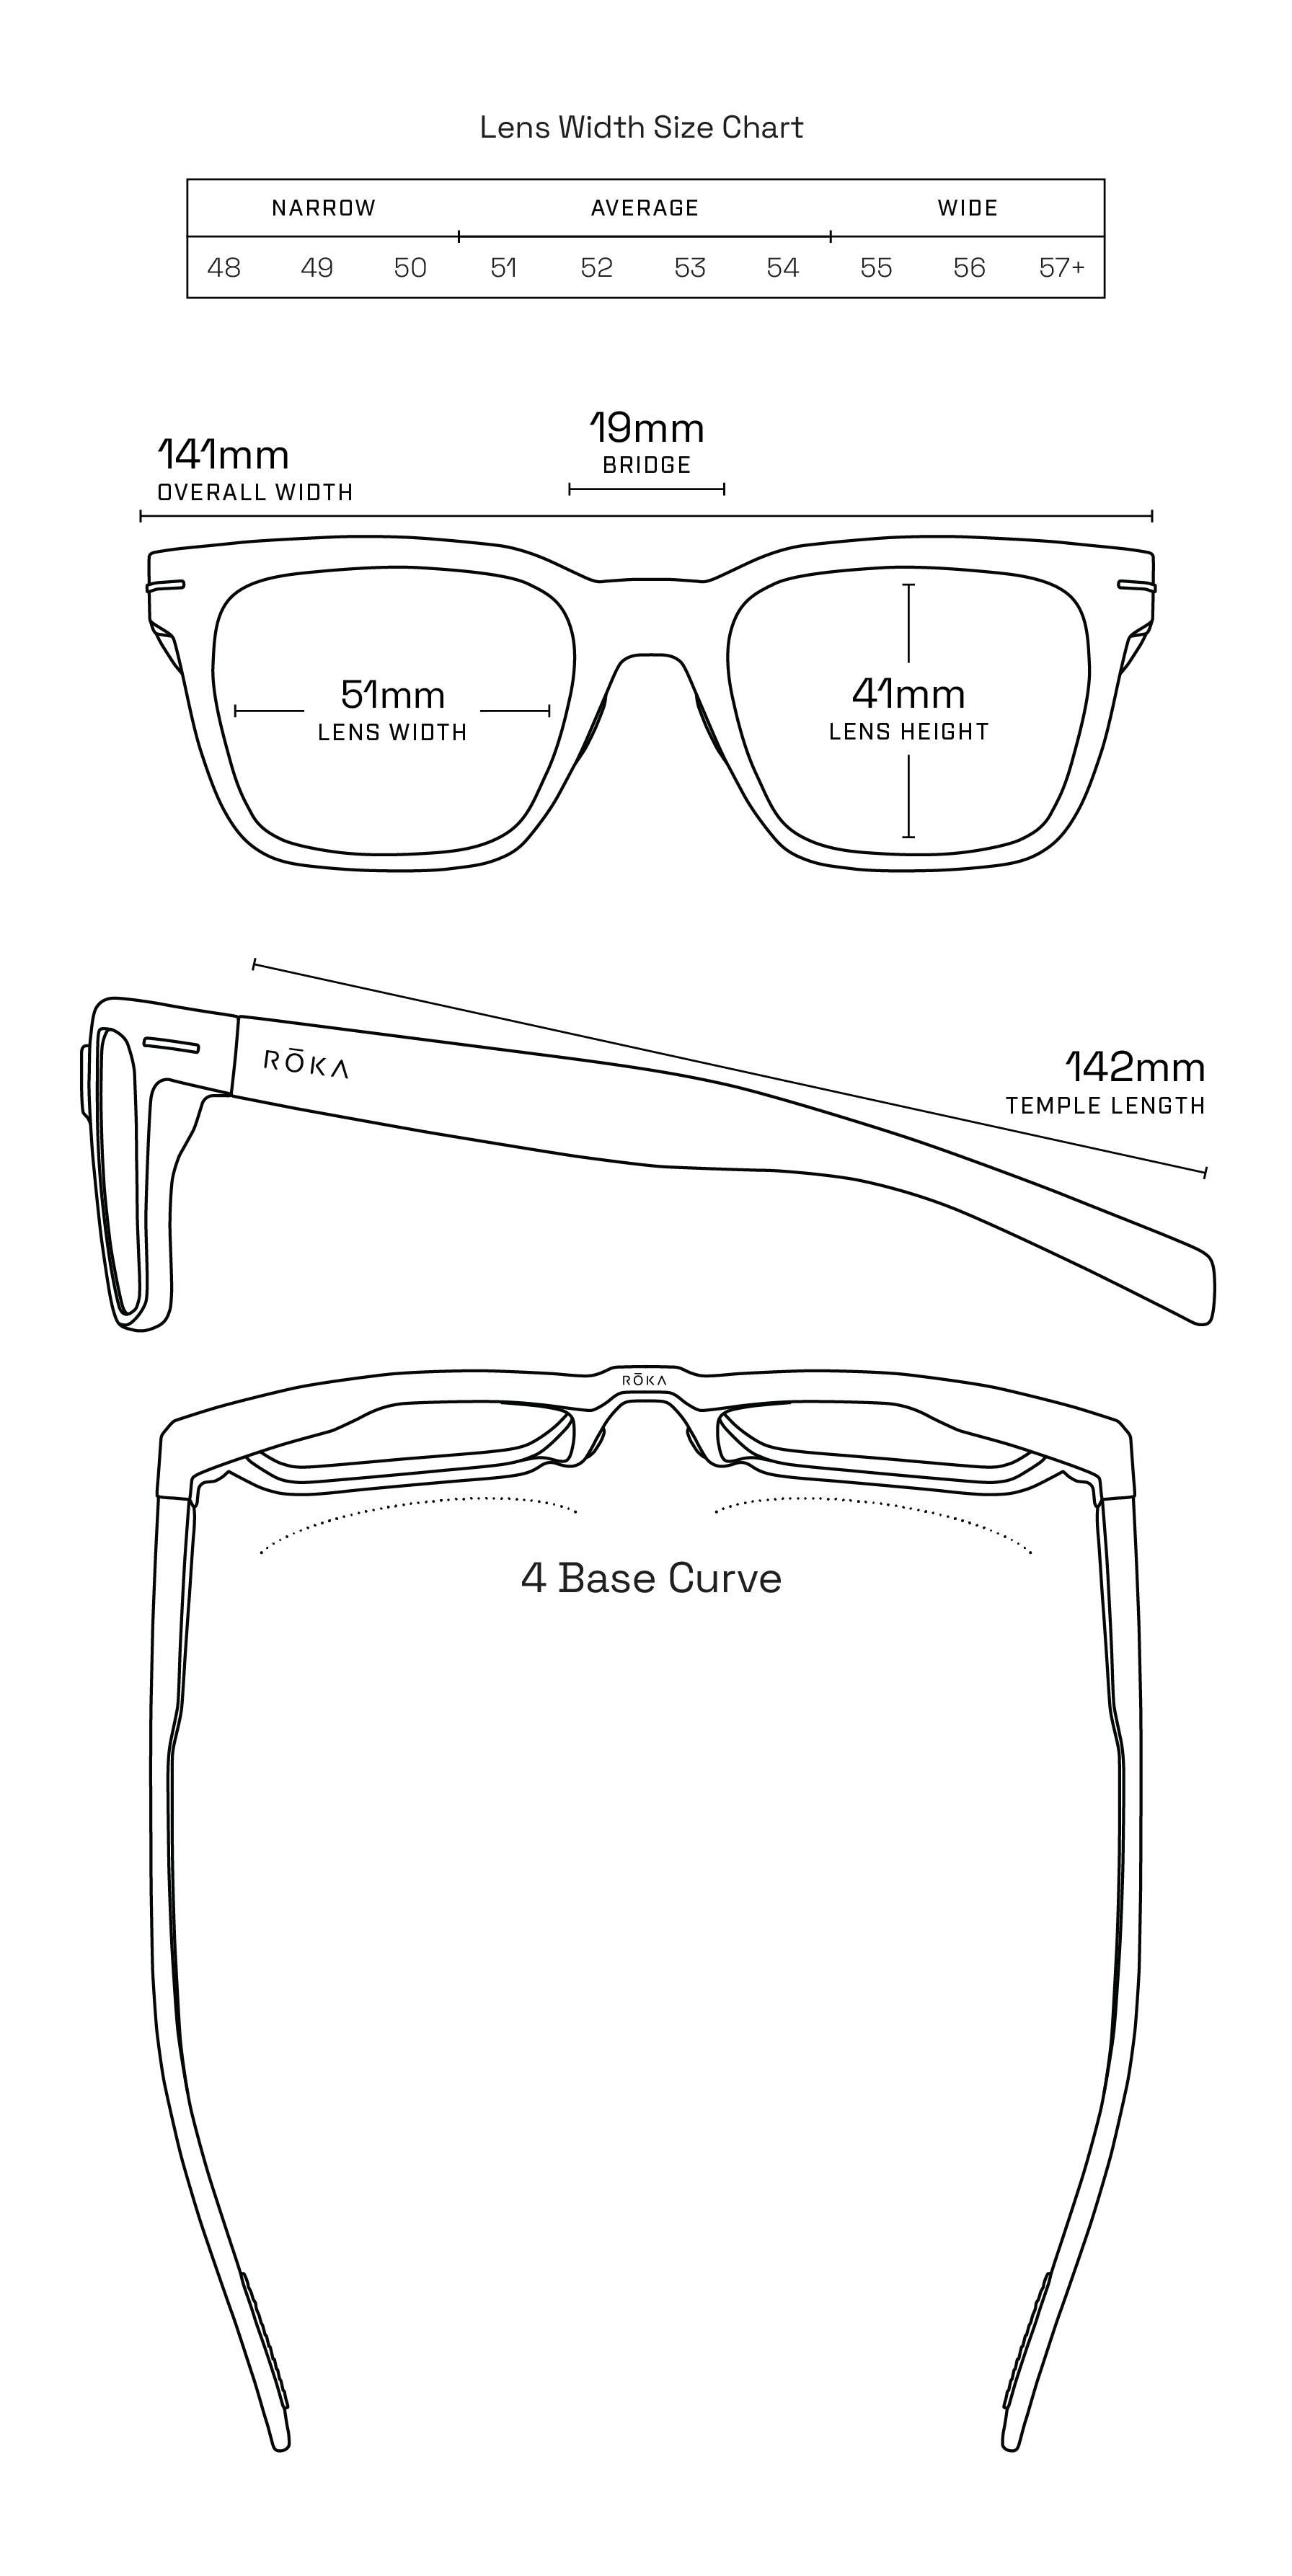 Weighing the Pros and Cons of Mirror Sunglasses, by Glassessize